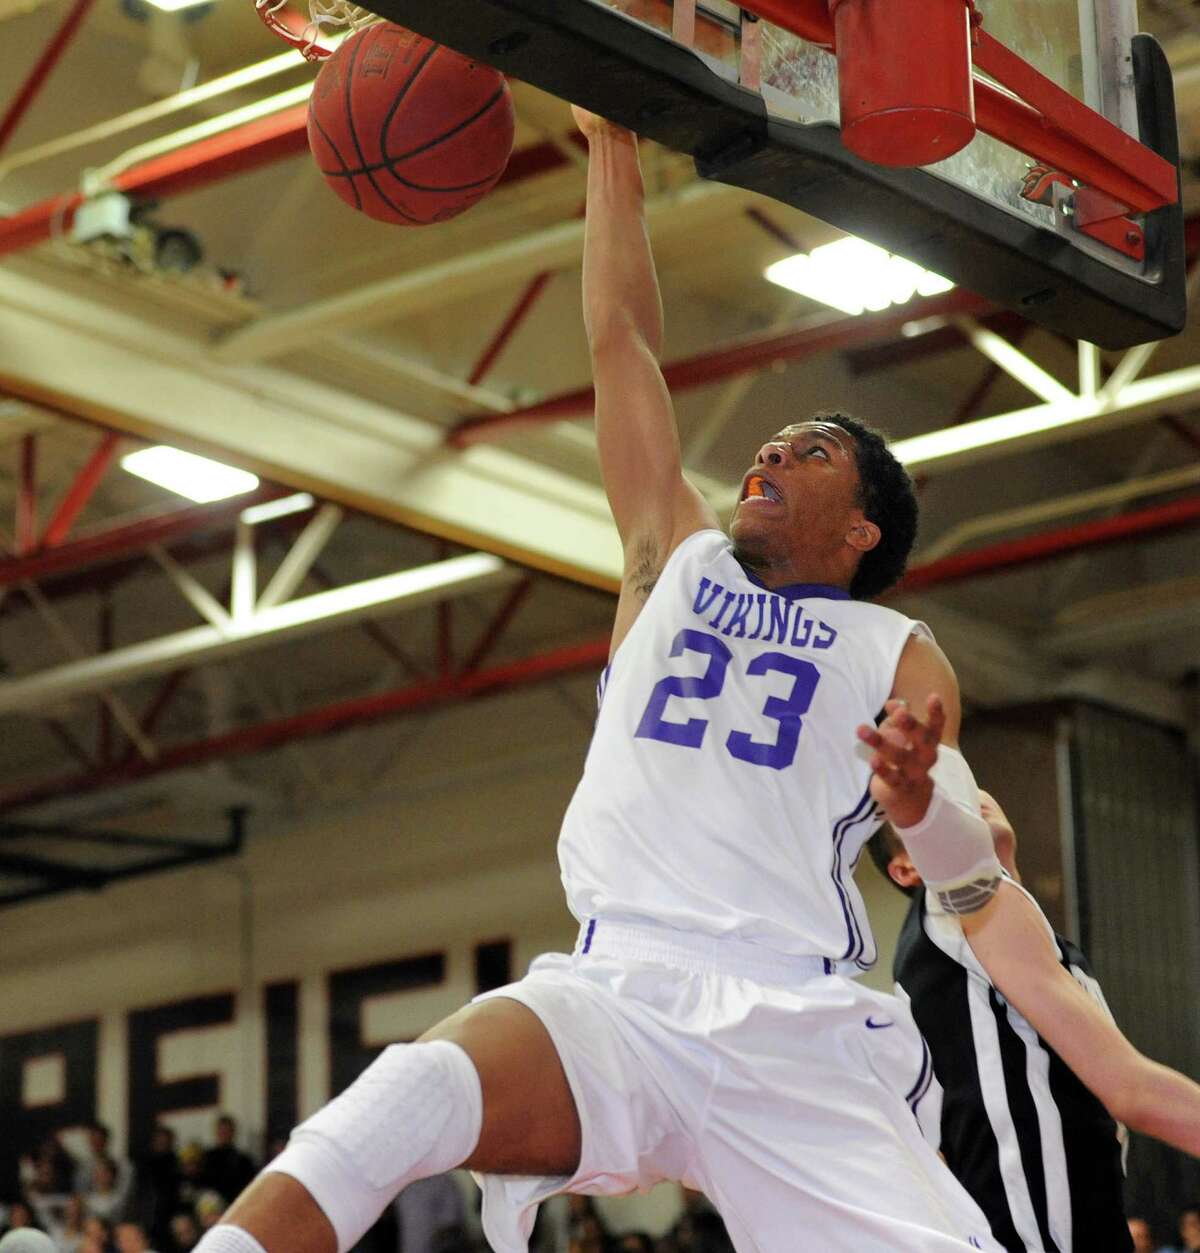 Westhill's Juan DelaCruz dunks the ball Wednesday, Mar. 4, 2015 during the FCIAC semi-final game against Trumbull at Fairfield Warde High School in Fairfield, Conn.